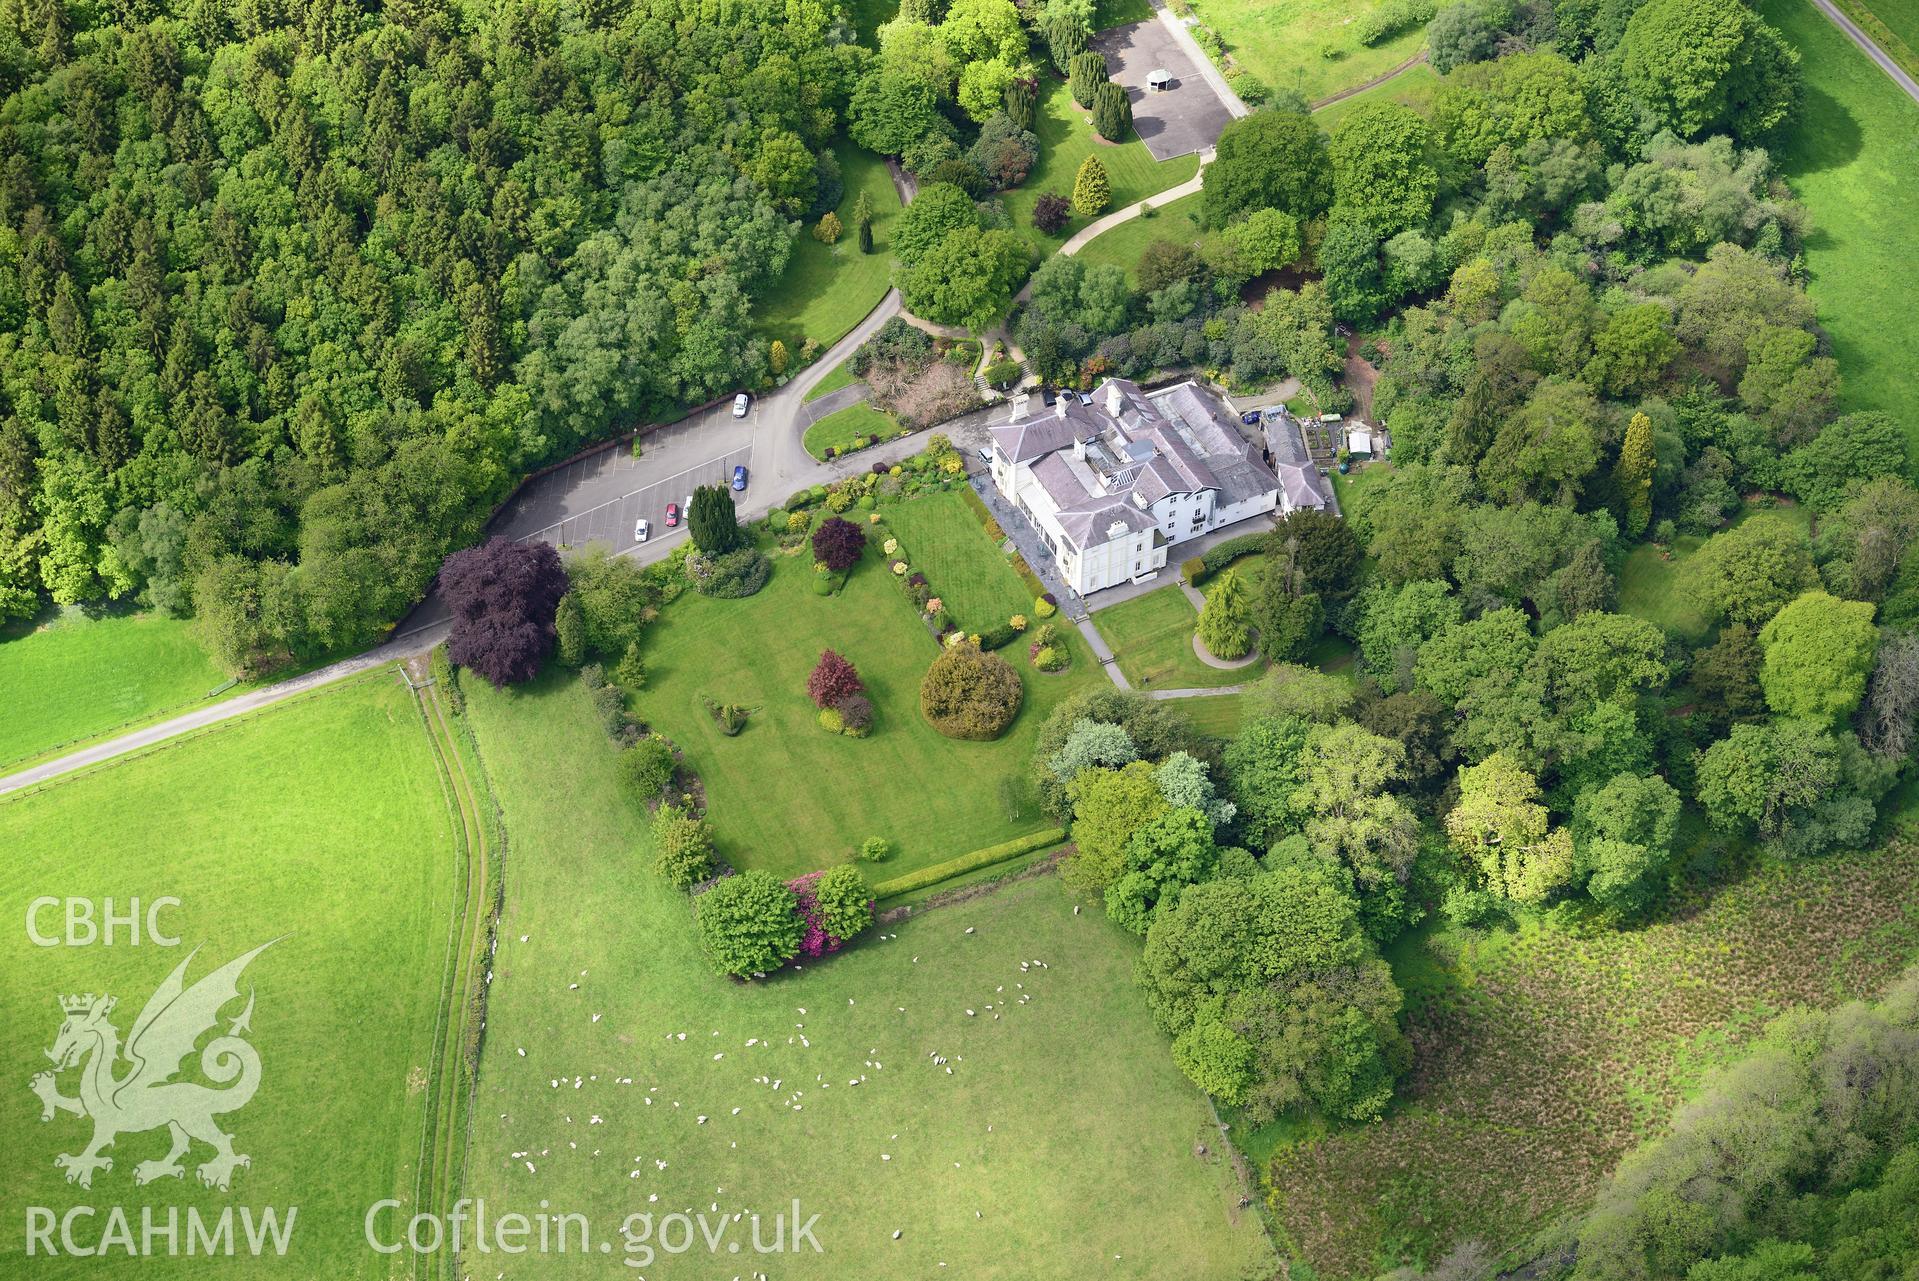 Falcondale mansion and garden, Lampeter. Oblique aerial photograph taken during the Royal Commission's programme of archaeological aerial reconnaissance by Toby Driver on 3rd June 2015.